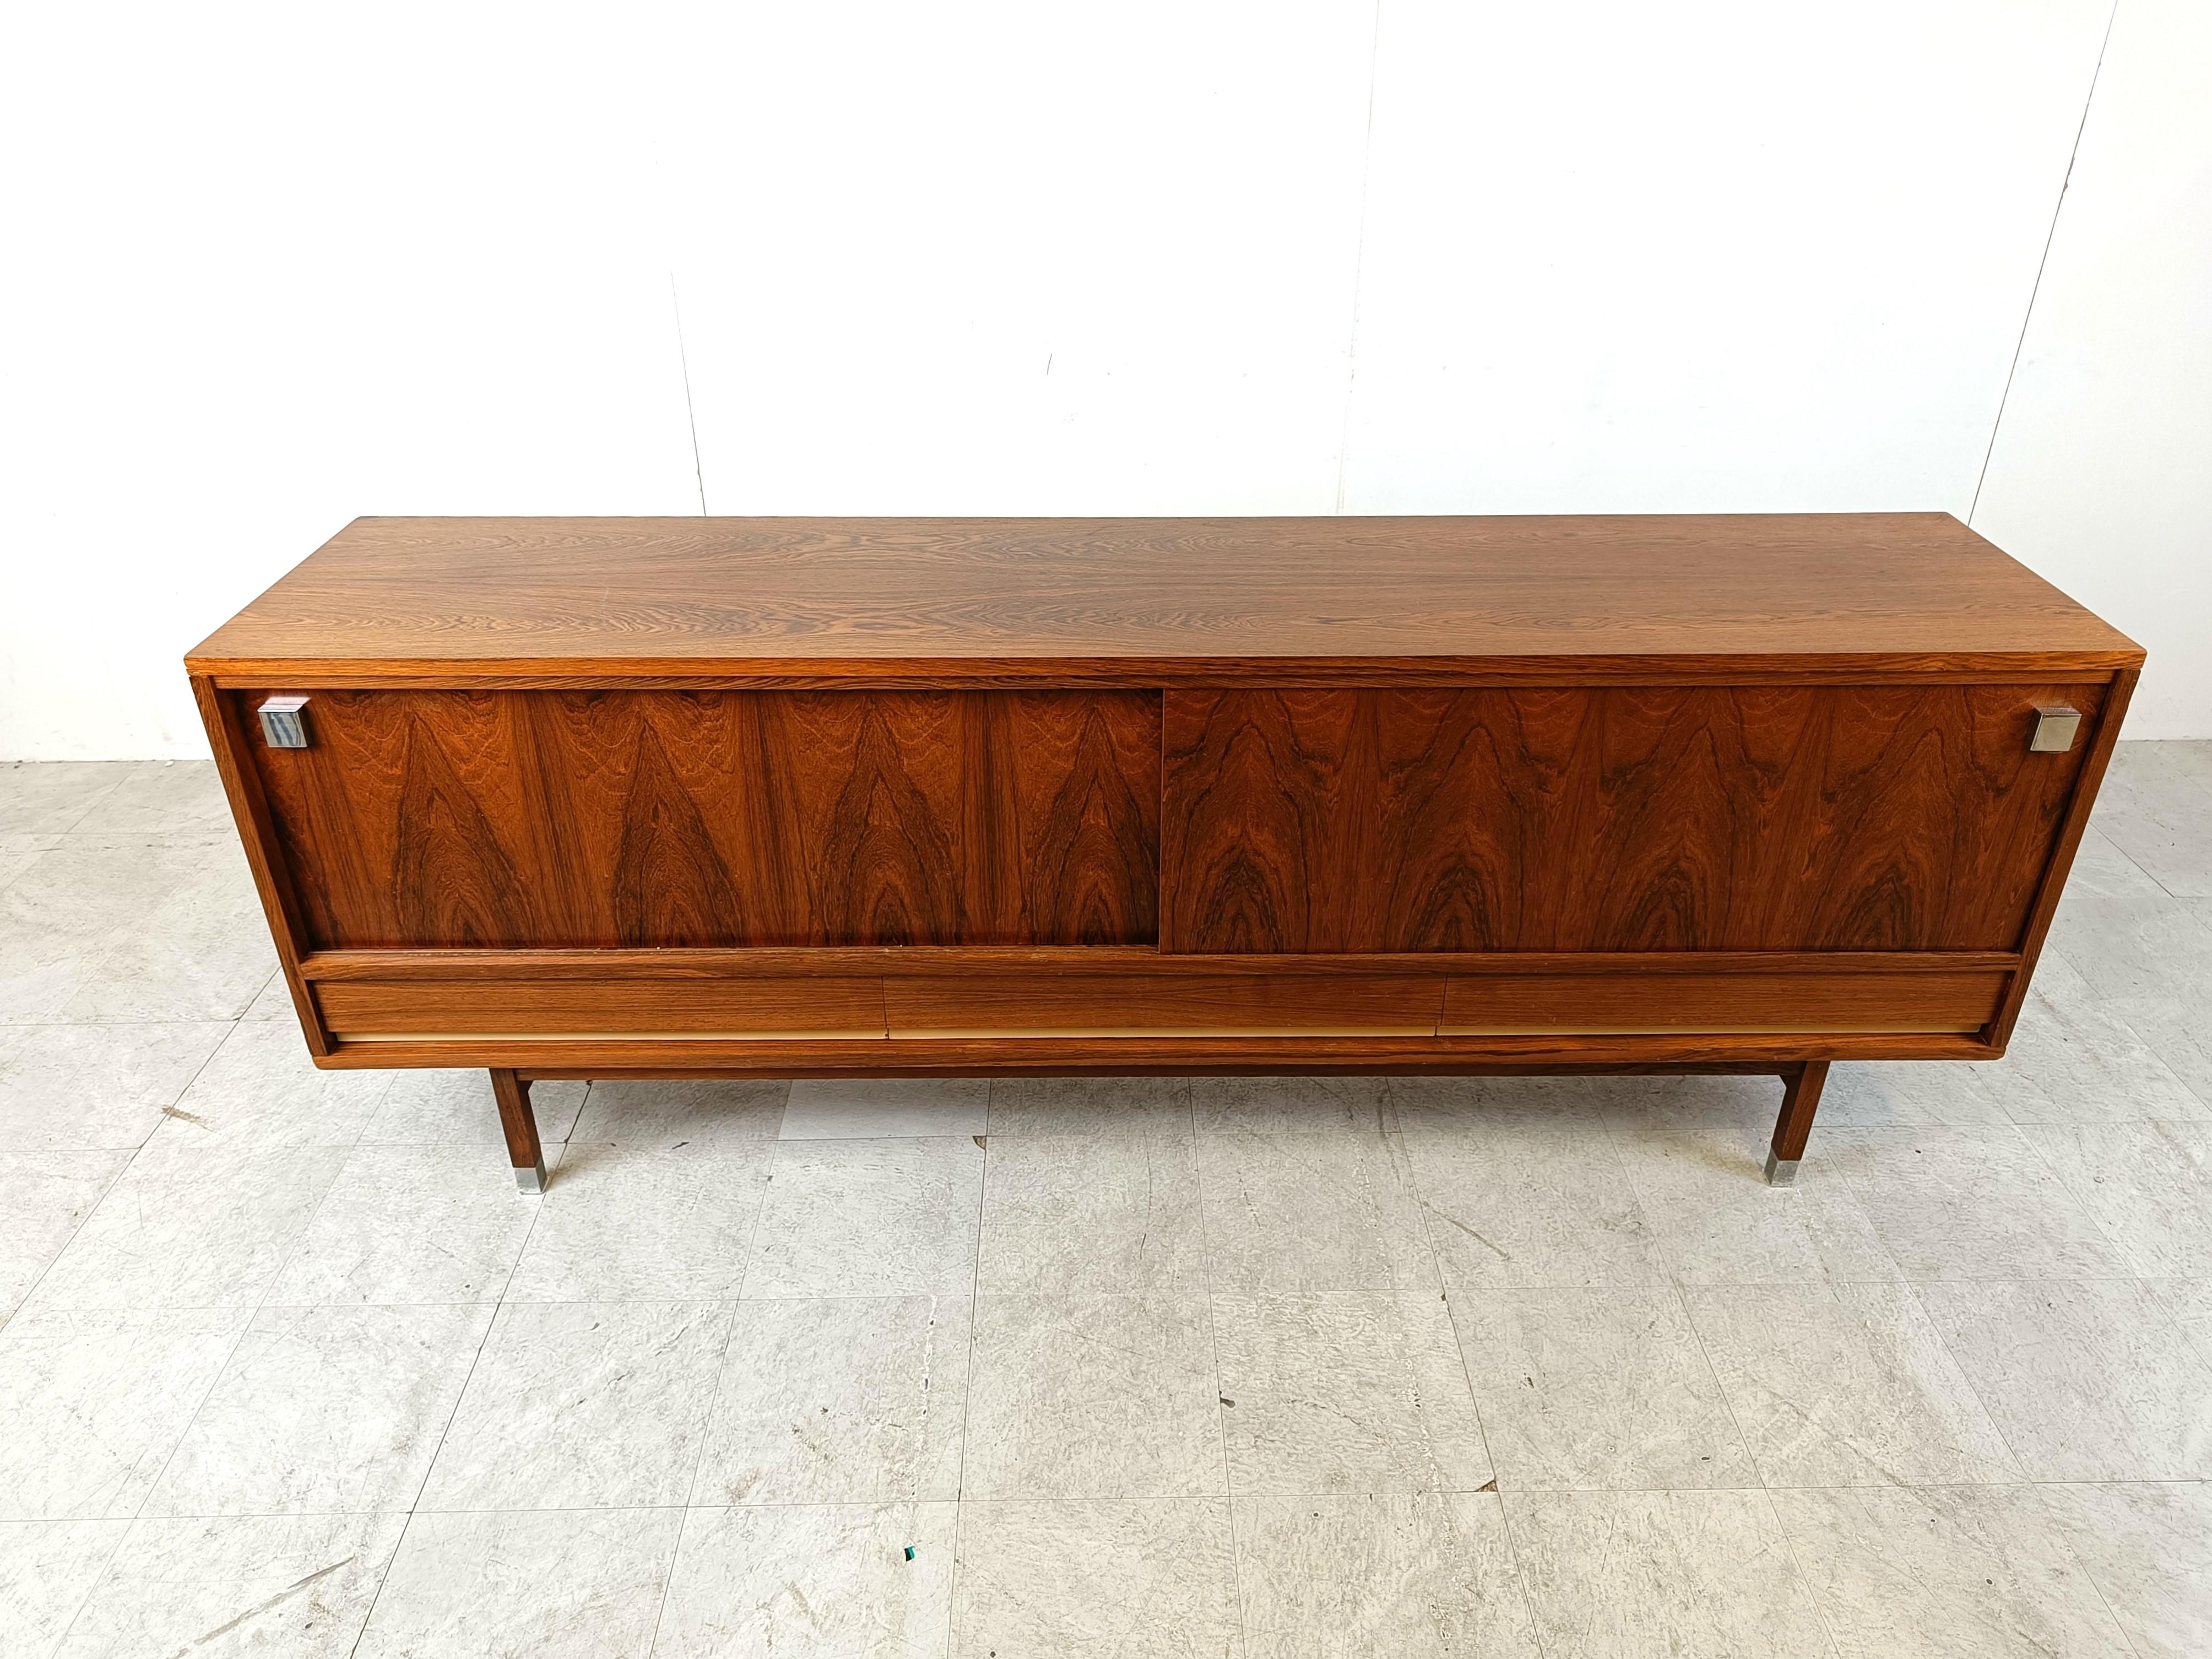 Mid century minimalist sideboard designed by Belgian designer Alfred Hendrickx for Belform in the 1960s.

Very spacious sideboard with sliding doors and 3 drawers.

Good condition.

1960s - Belgium

Dimensions:

Lenght: 220cm/86.61